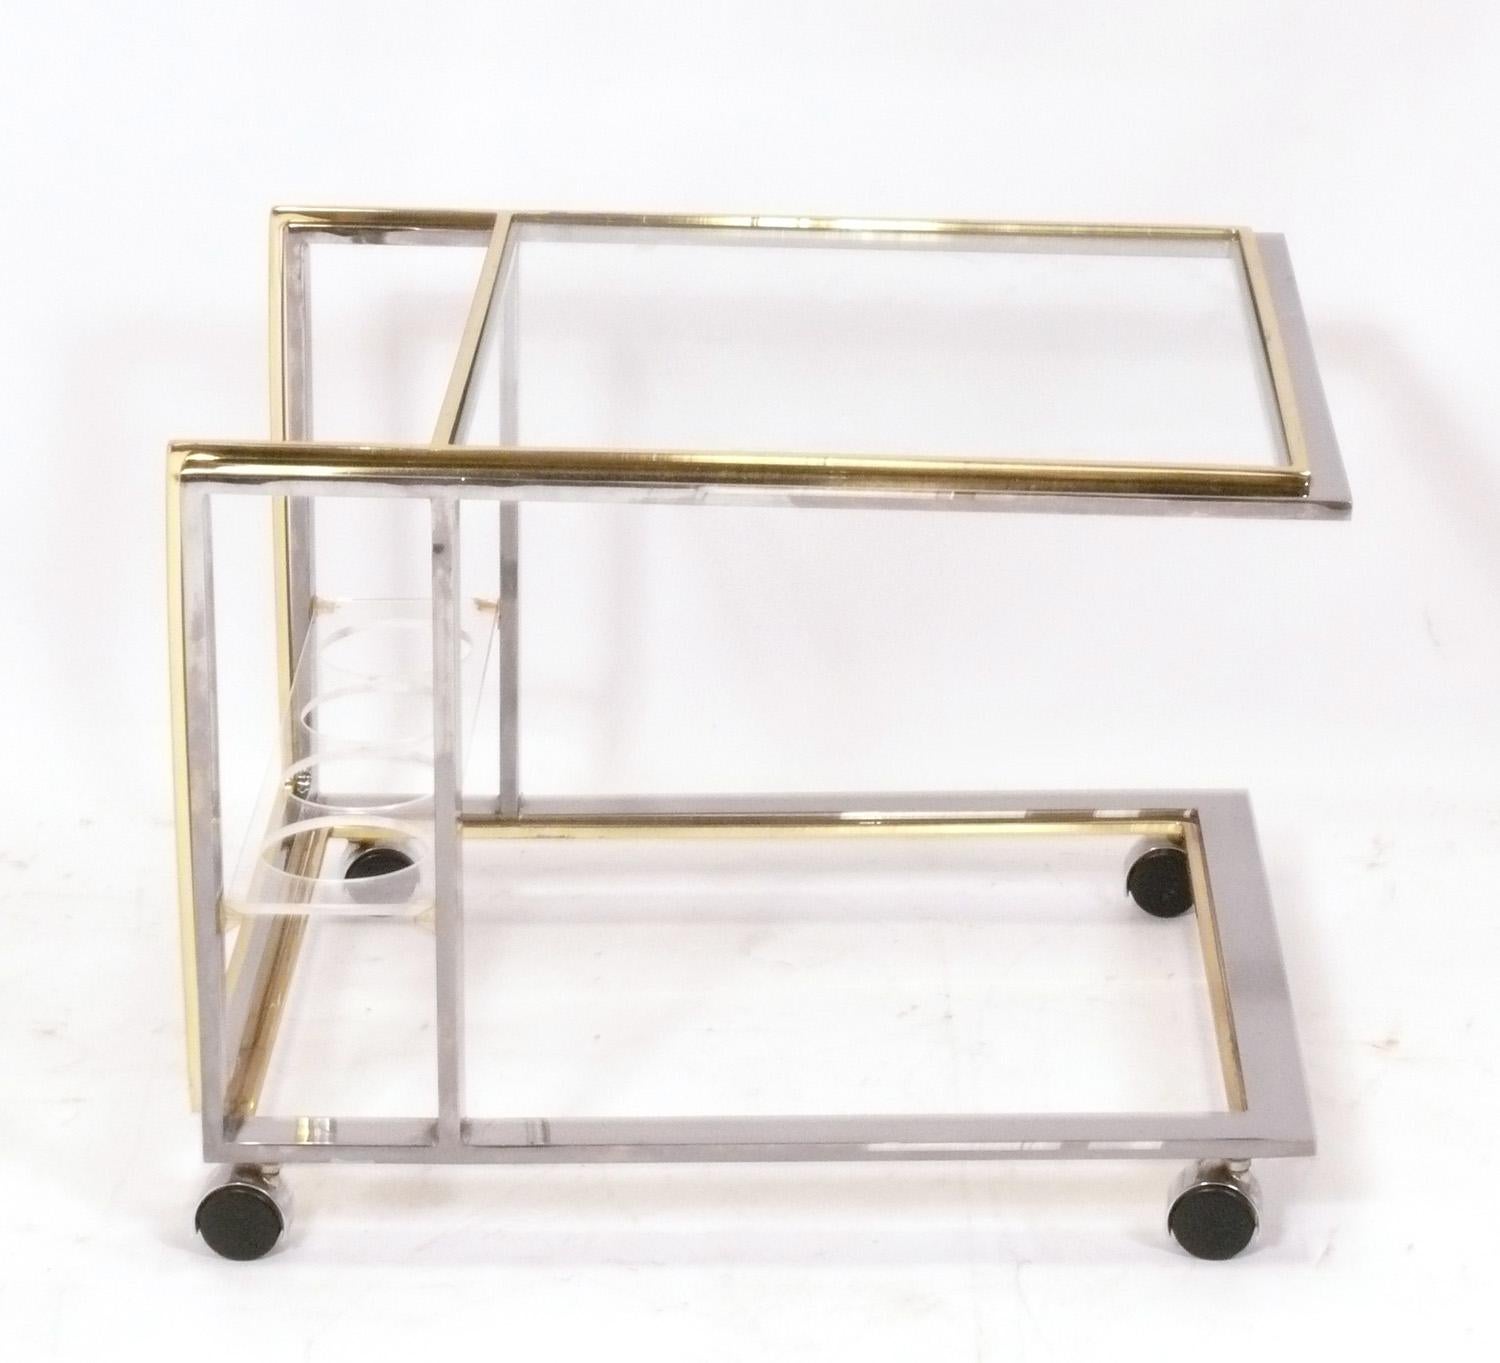 Chrome and Brass Mid Century Italian Bar Cart, attributed to Romeo Rega, Italy, circa 1960s. It has two glass shelves and a lucite bottle rack at the bottom. The lower glass panel was broken while preparing this cart to photograph and will be